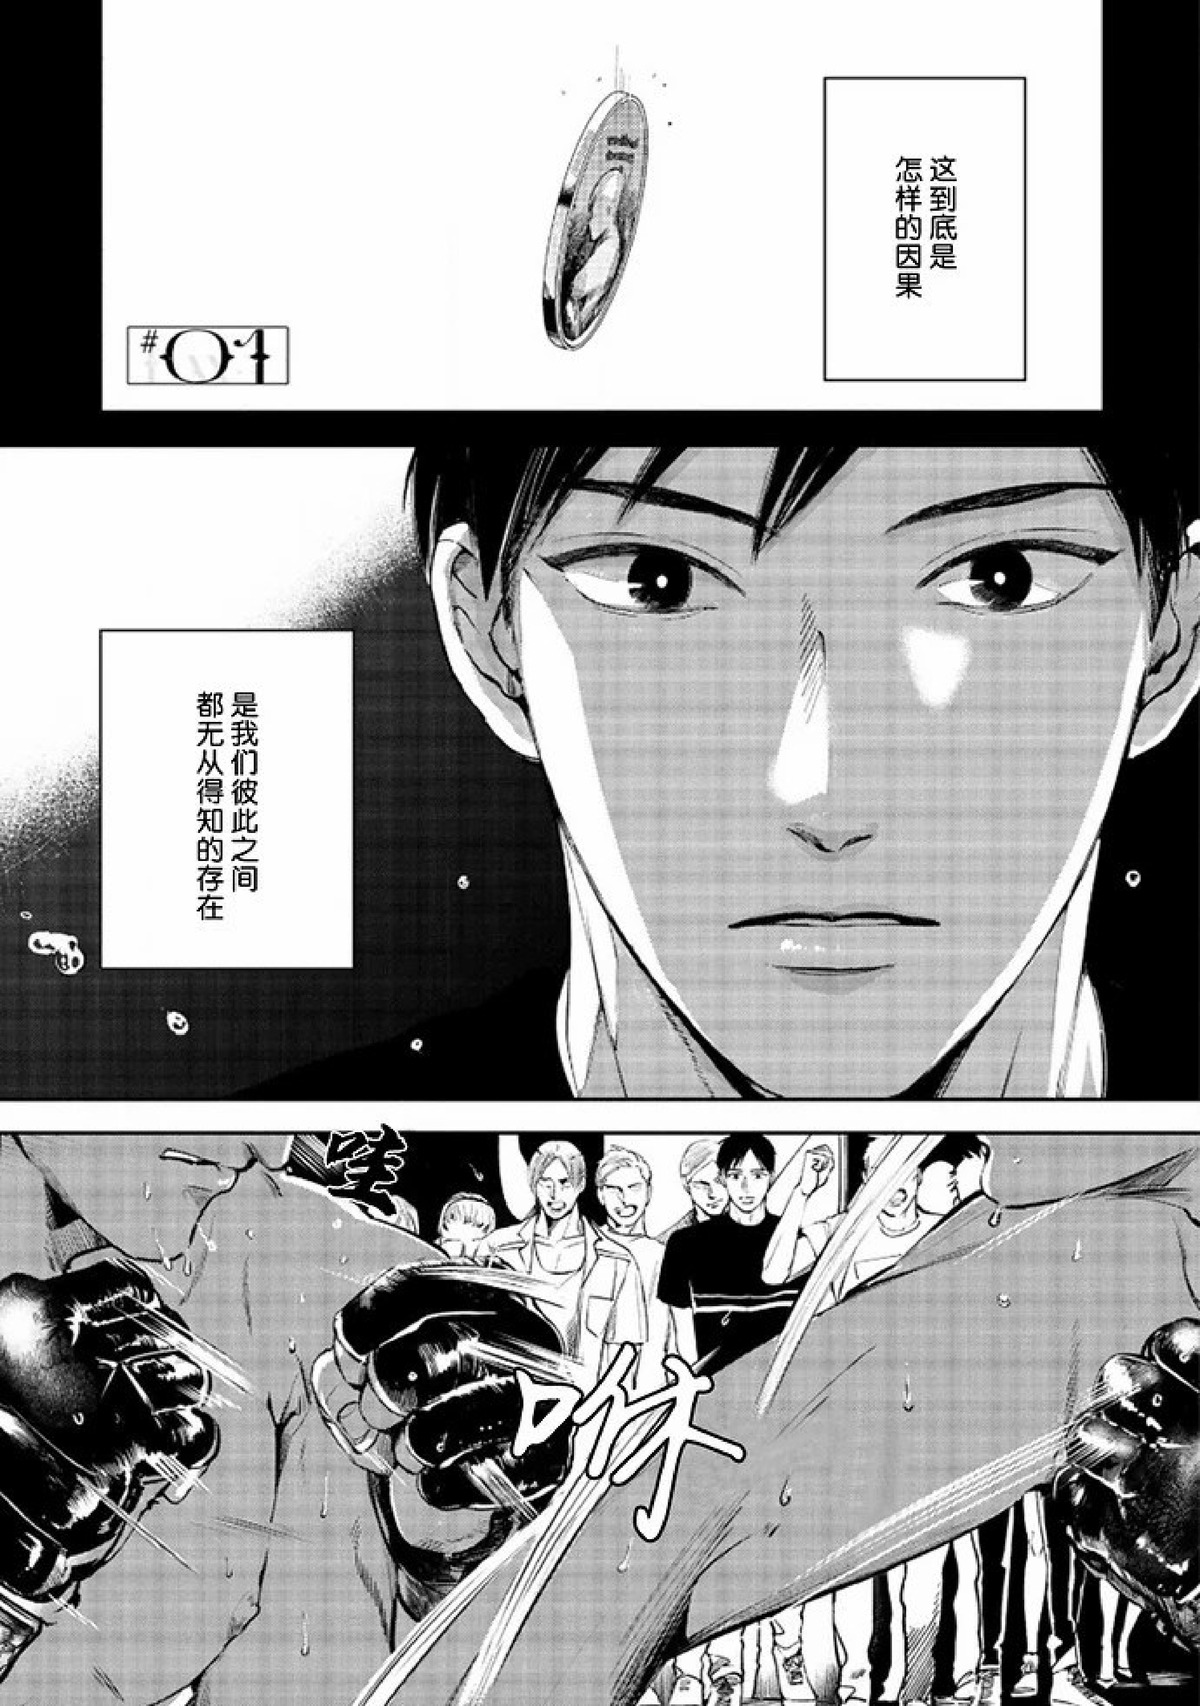 【Two sides of the same coin[腐漫]】漫画-（上卷01-02）章节漫画下拉式图片-7.jpg